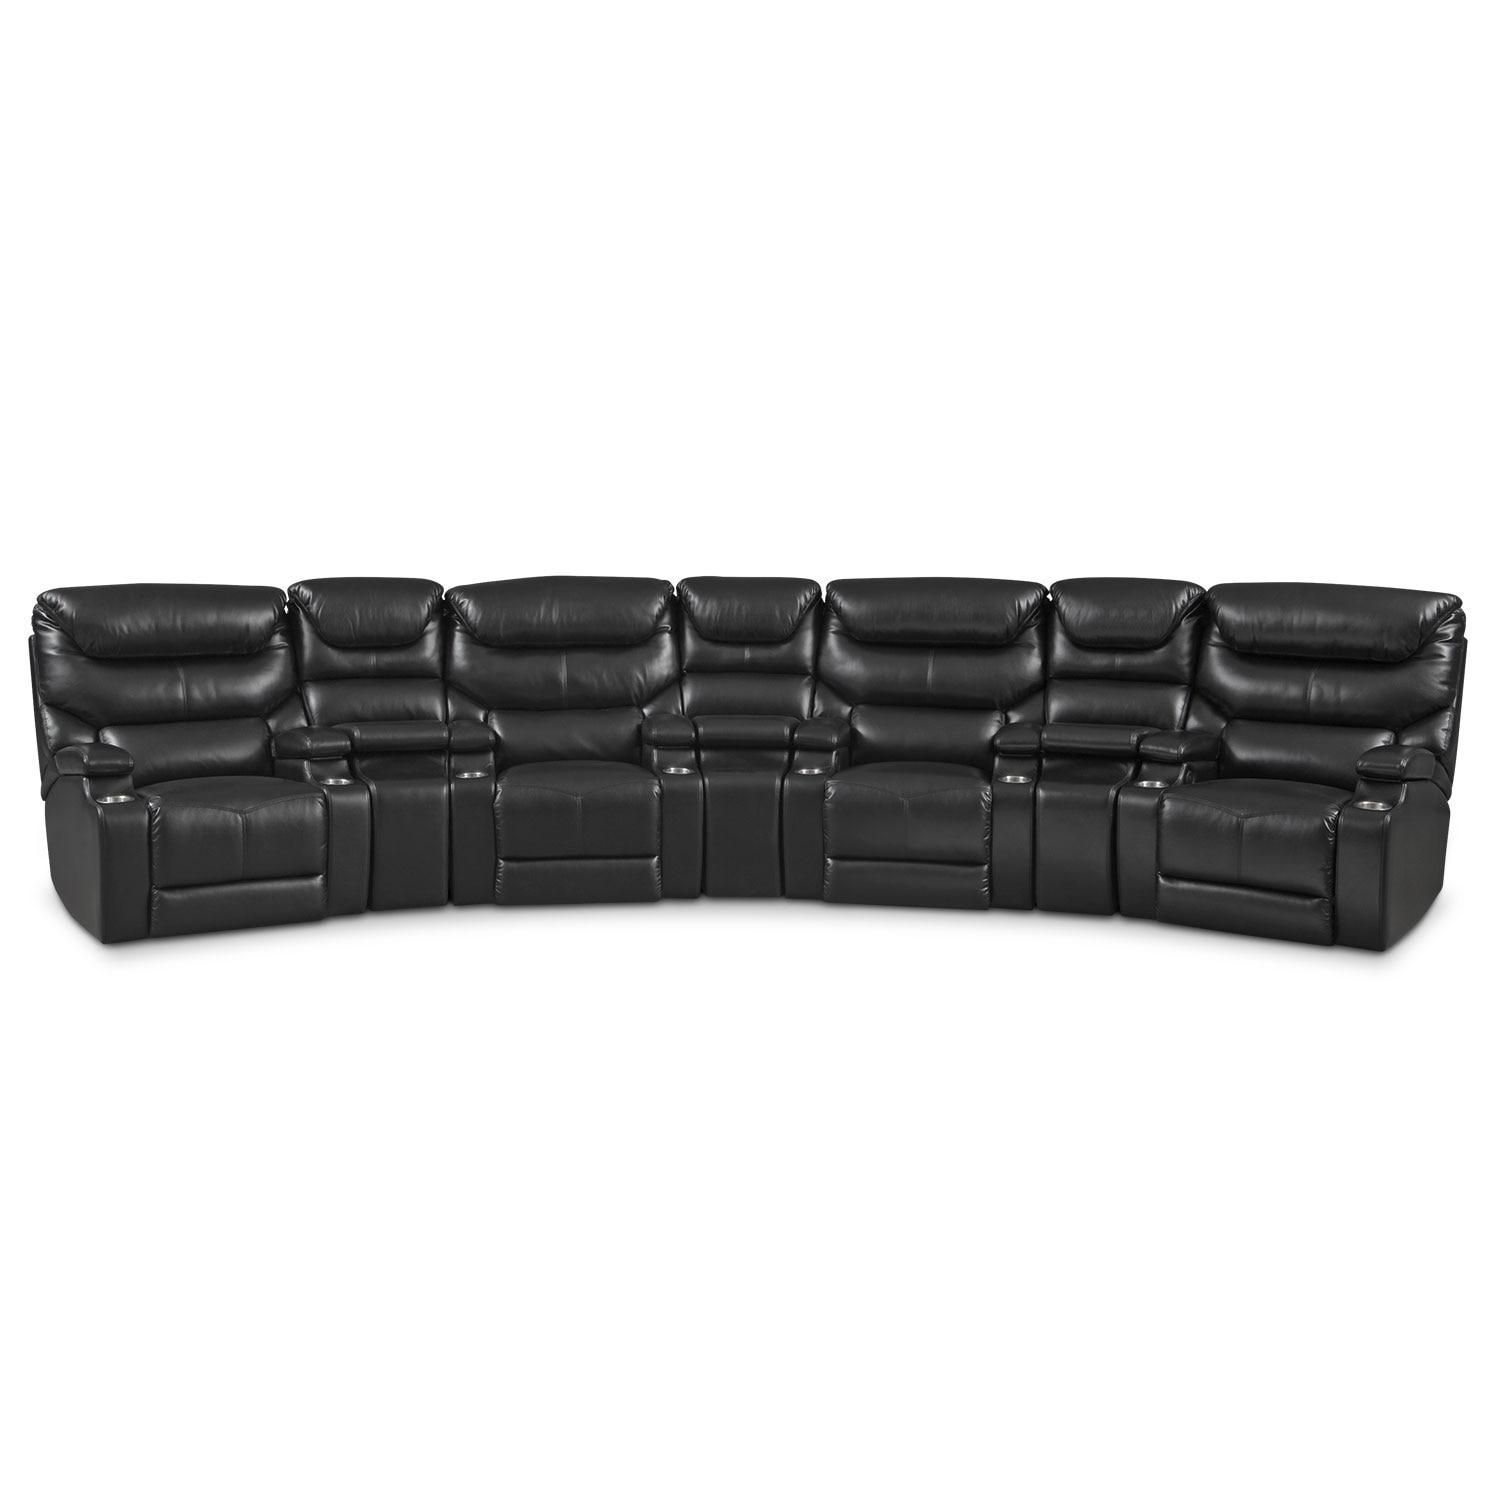 Sectional Sofas | Value City Furniture | Value City Furniture For Value City Sofas (View 12 of 20)